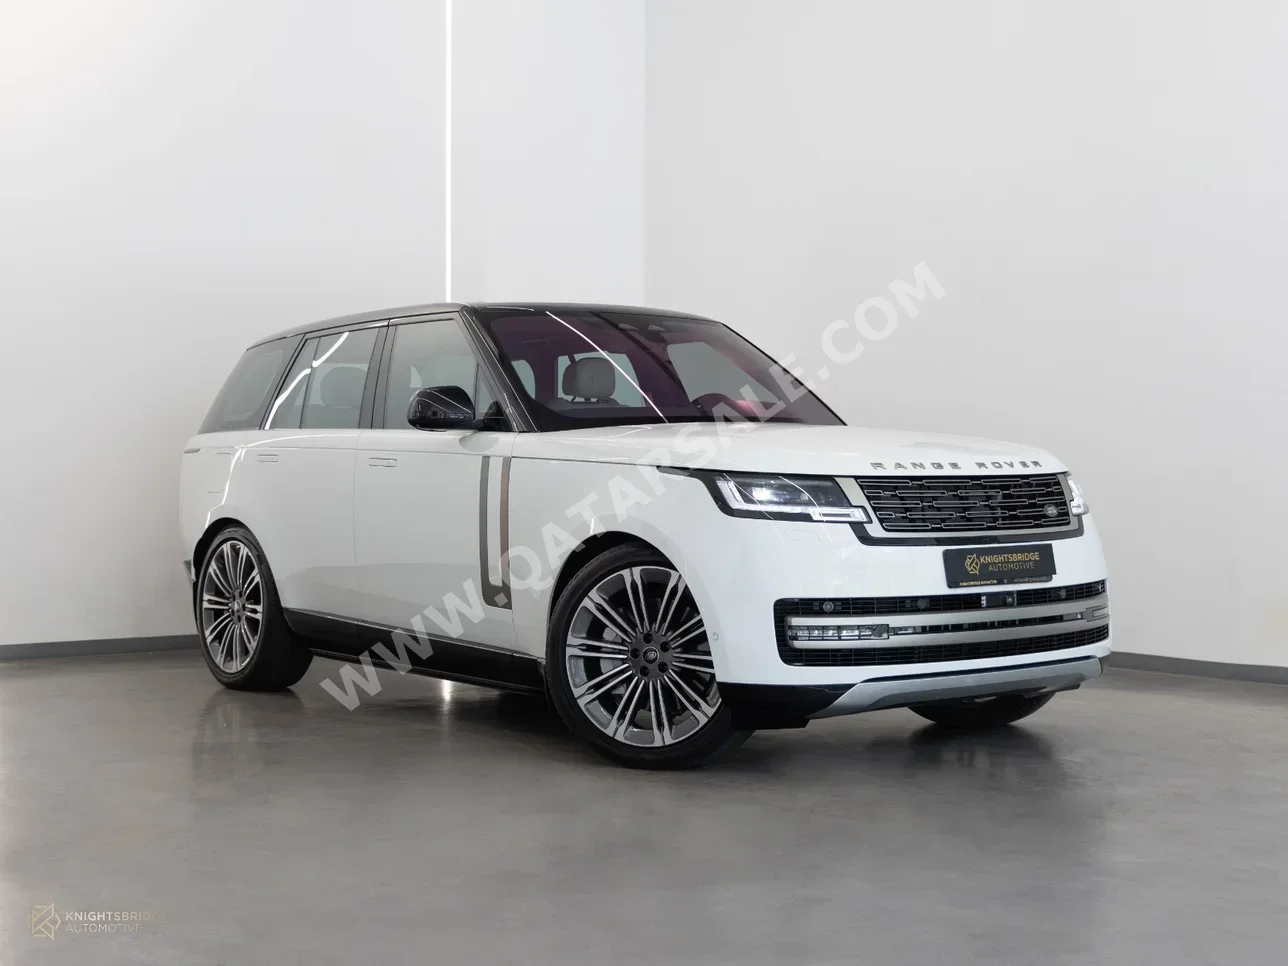 Land Rover  Range Rover  Vogue HSE  2023  Automatic  29,500 Km  8 Cylinder  Four Wheel Drive (4WD)  SUV  White  With Warranty